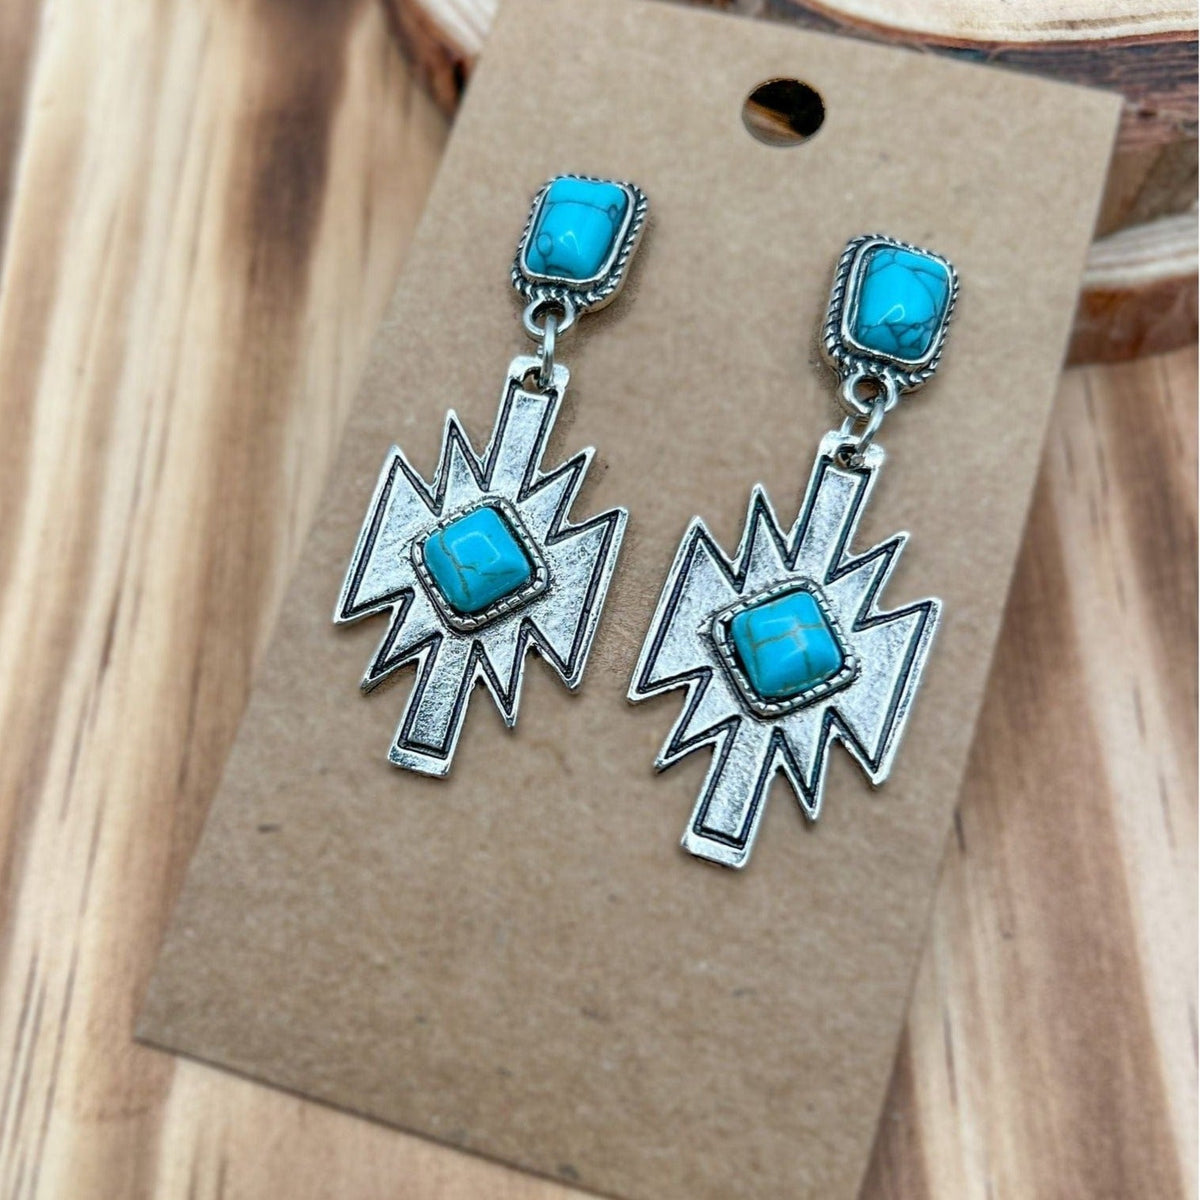 Saloon Shoot Out Turquoise Earrings TheFringeCultureCollective